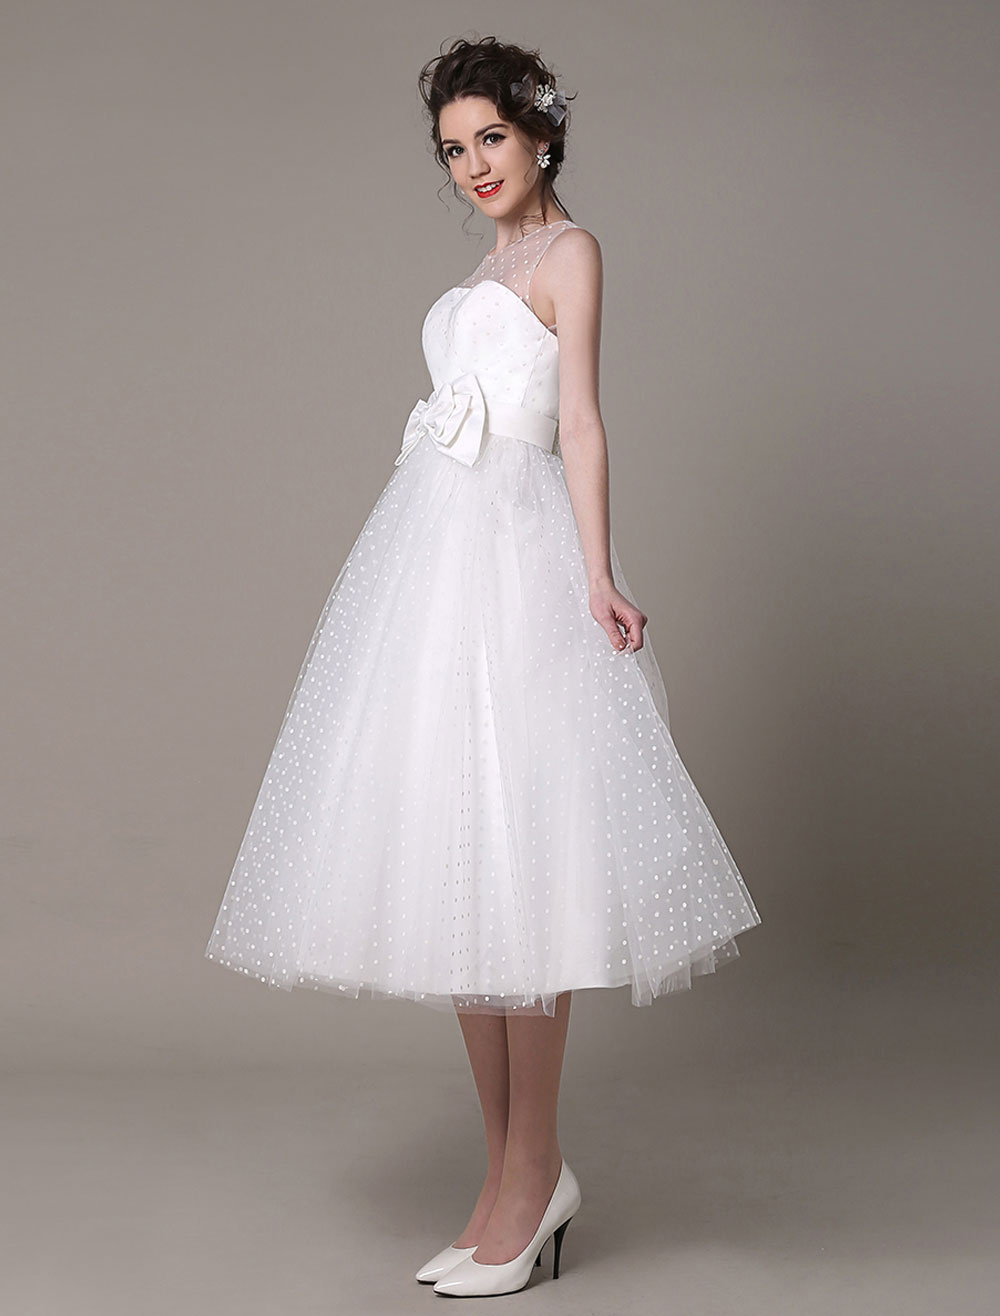 Tulle Wedding Dress Strapless A-Line Tea Length Bridal Dress With Bow ...